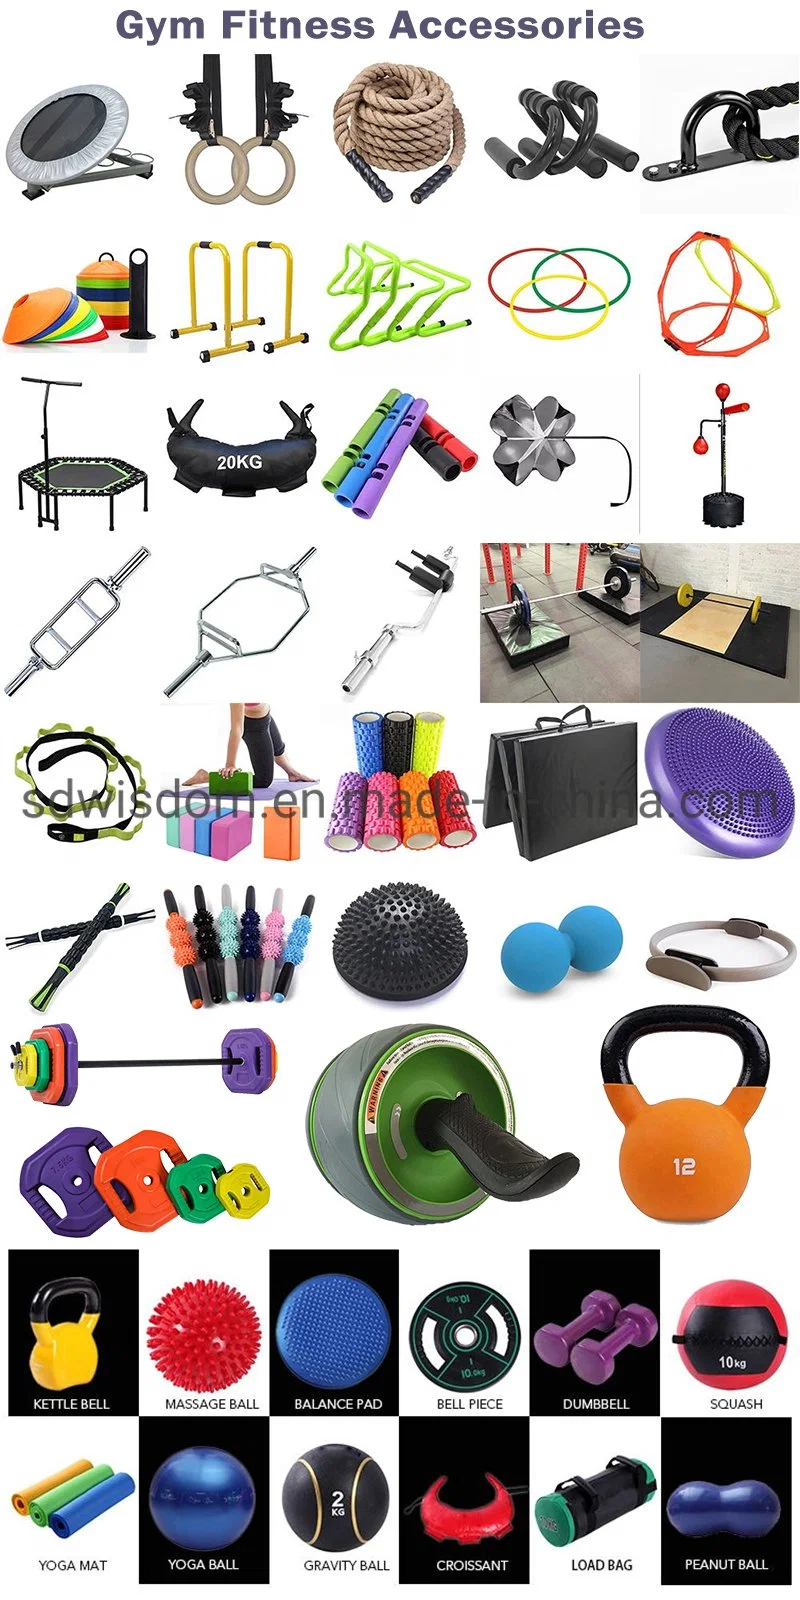 Colorful Rubber Gym Equipment Weight Bar Plates Sets for Les Mills